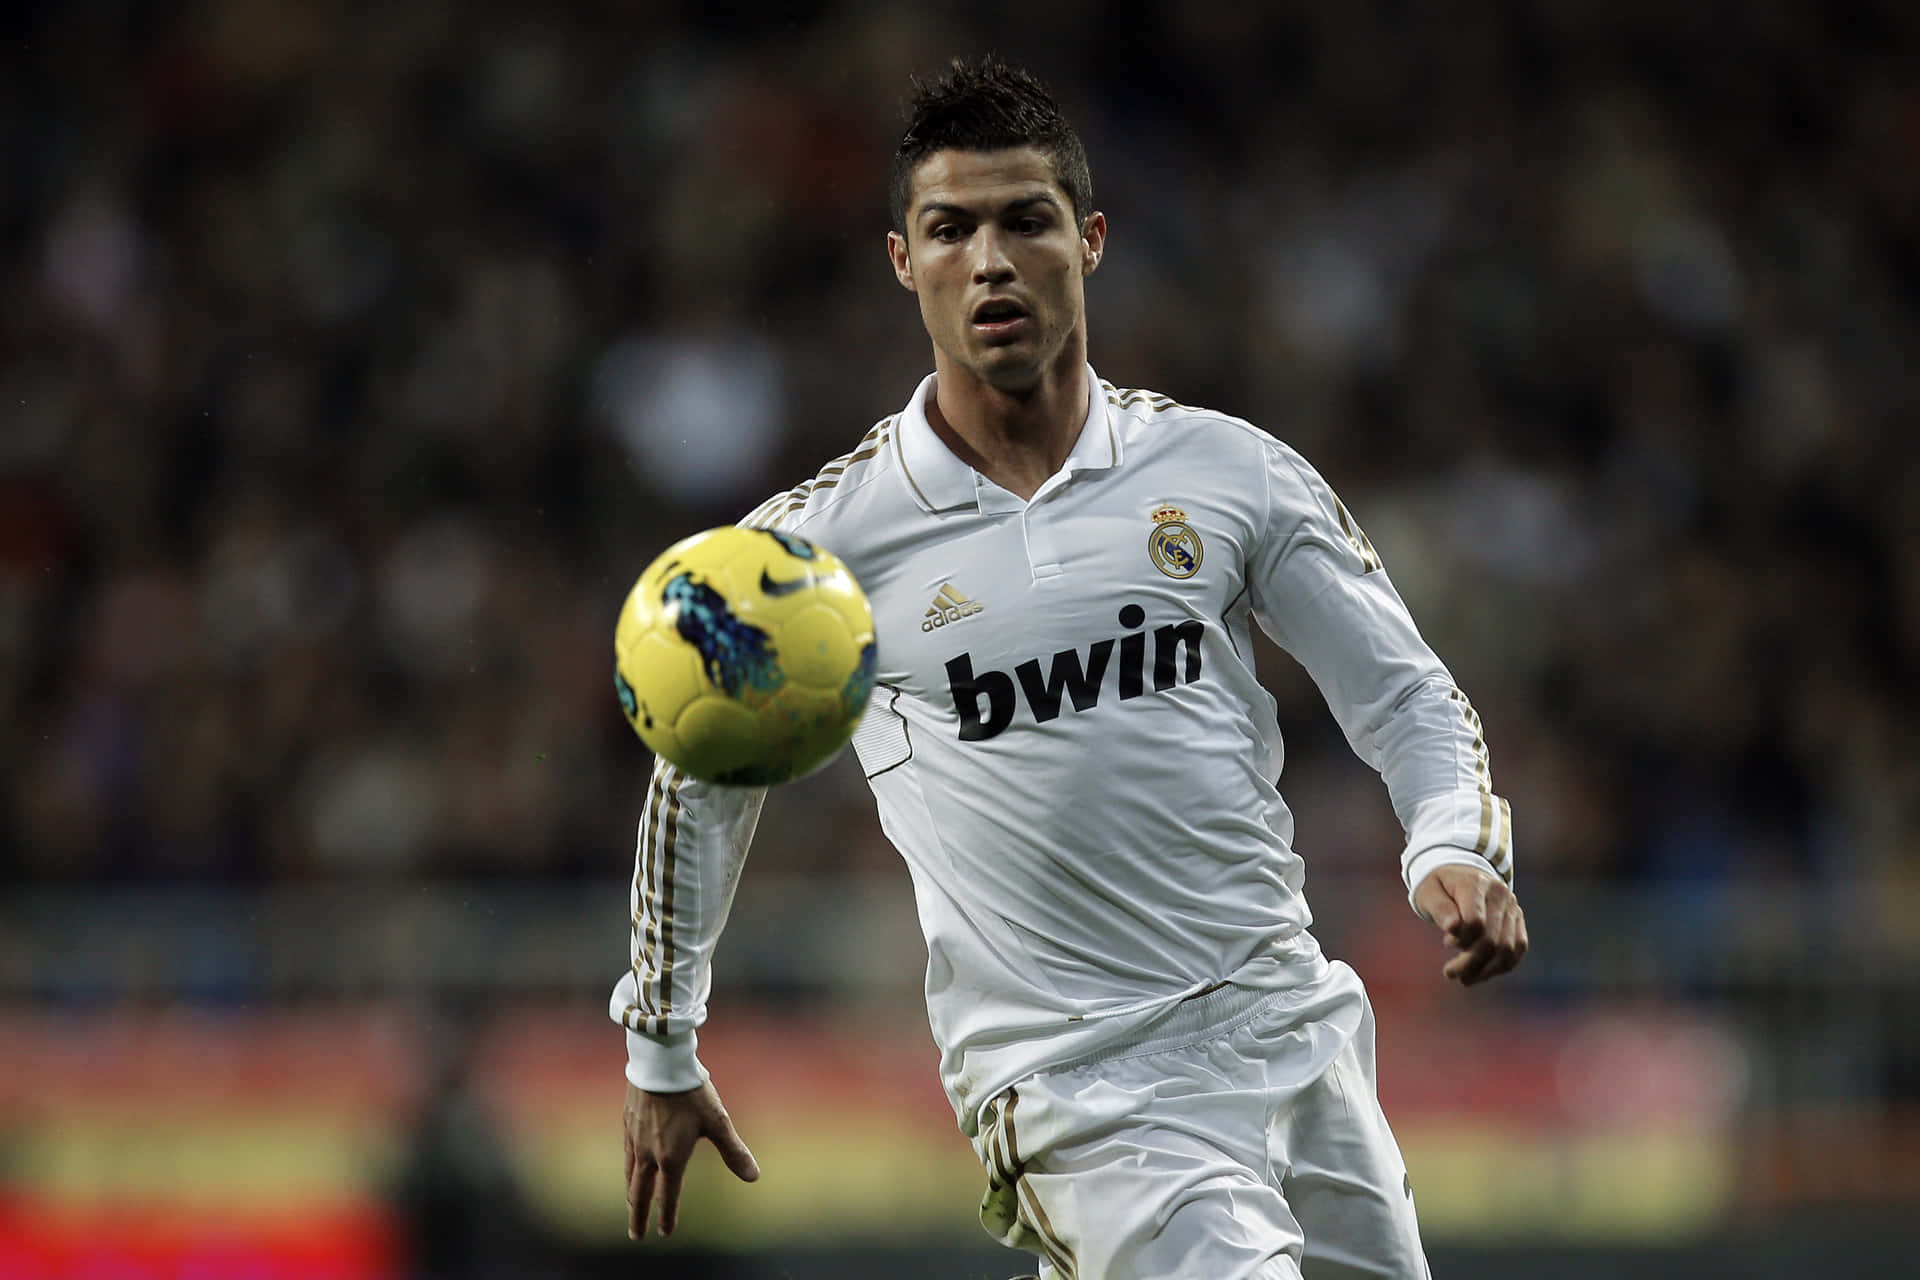 Cristiano Ronaldo launching a powerful goal attempt on the field